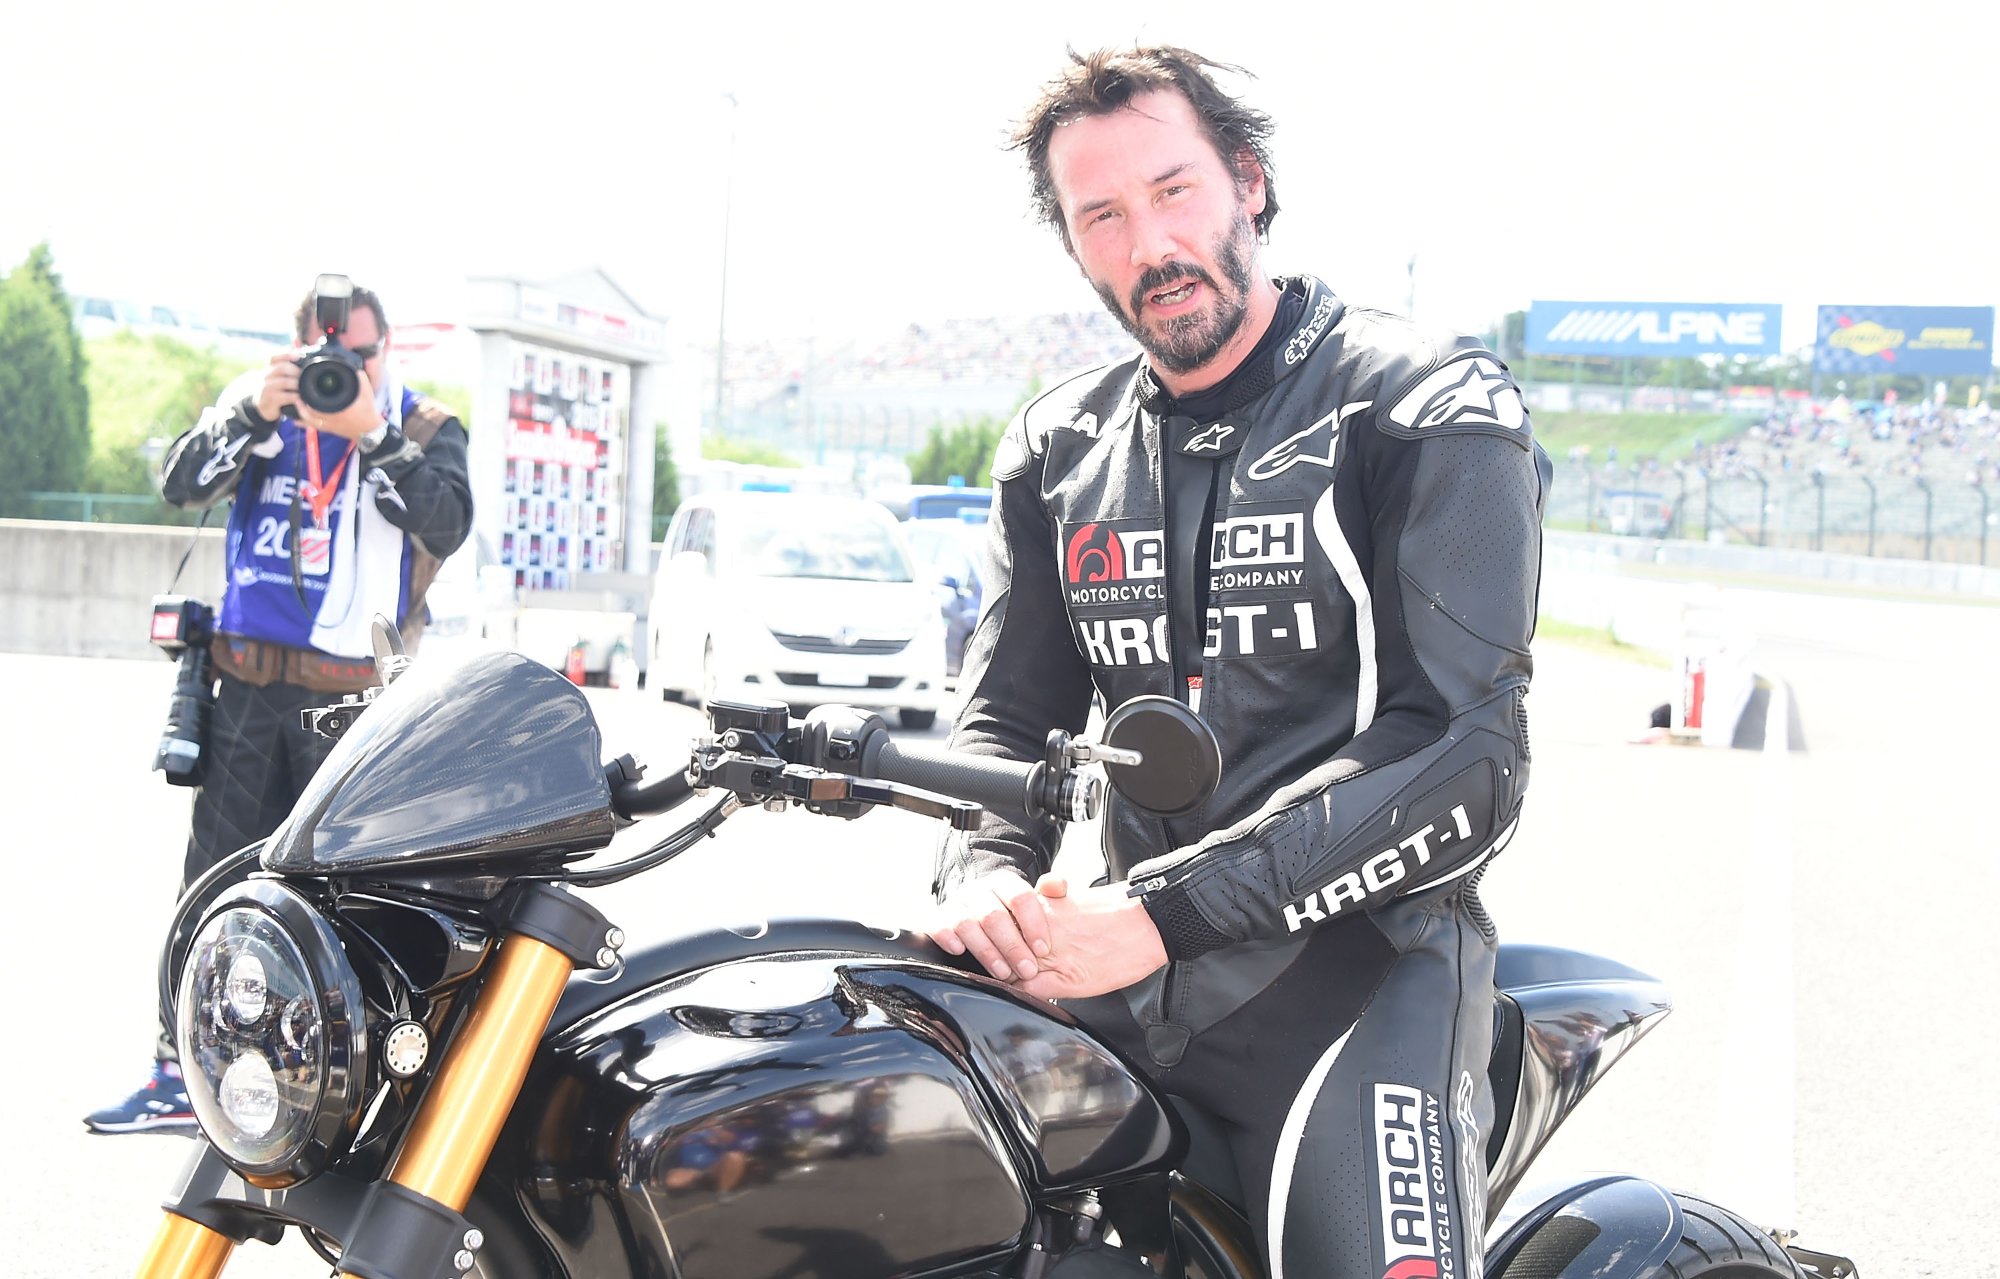 Keanu Reeves on motorcycle in article about an accident sitting on the bike wearing black